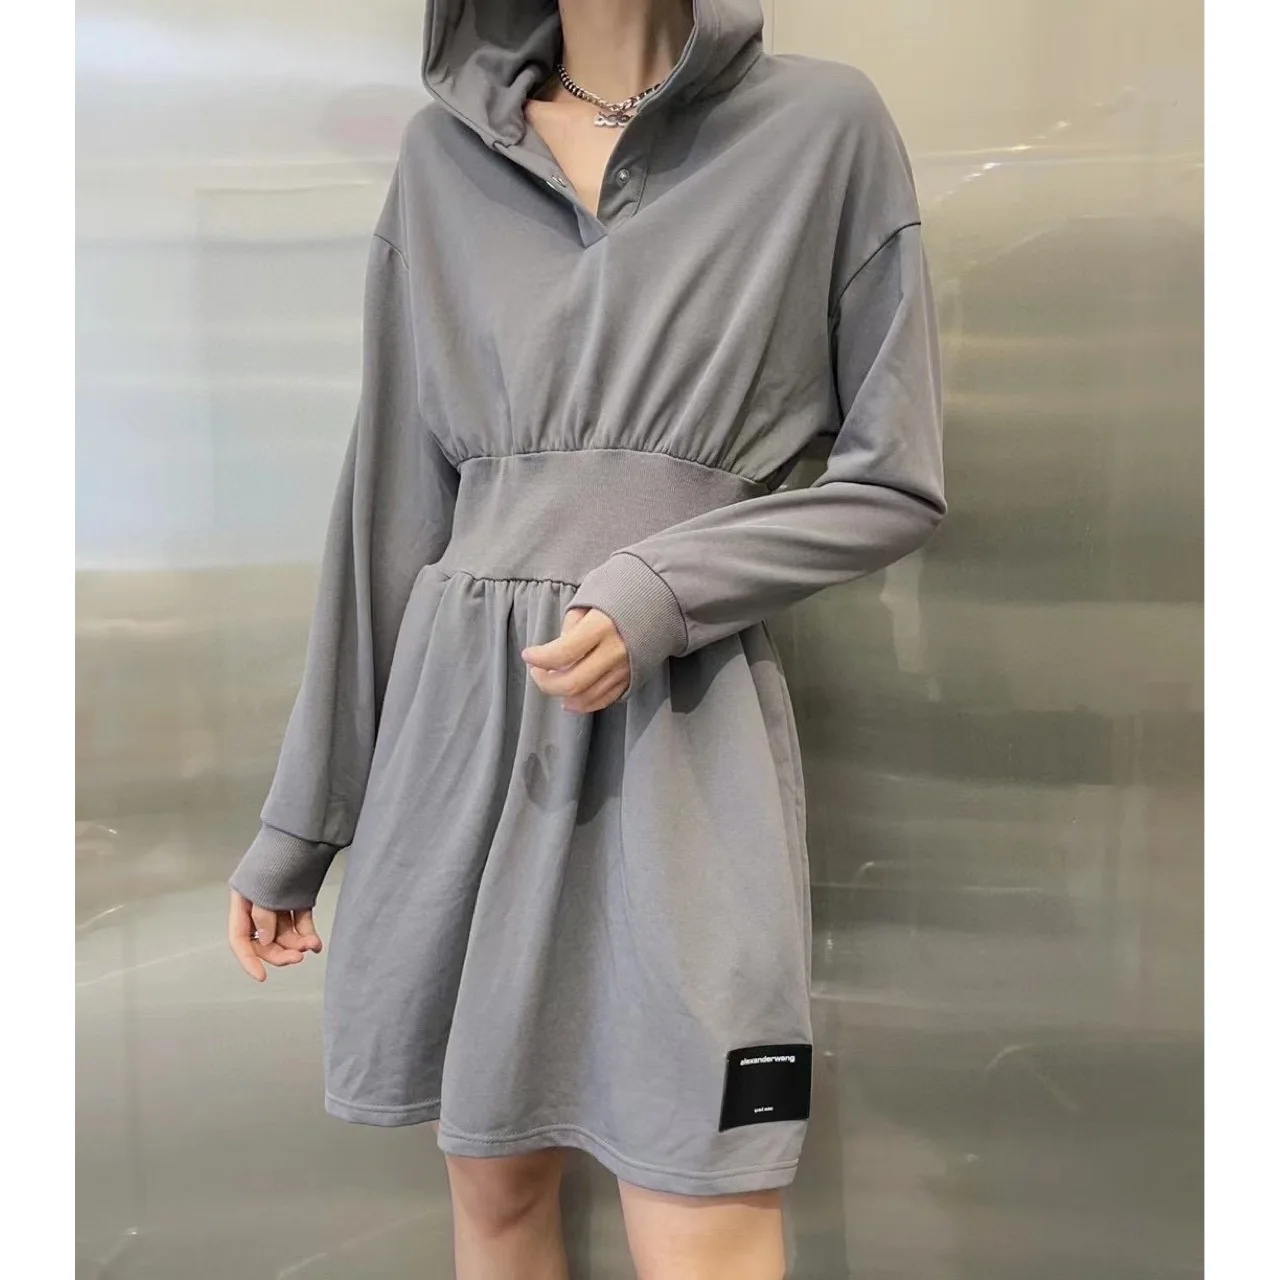 

Fashion AW Wang Shouyao Hooded Skirt 21ss Early Autumn New Letter Printed Leather Brand Label Long Sleeve Dress Women's Dress